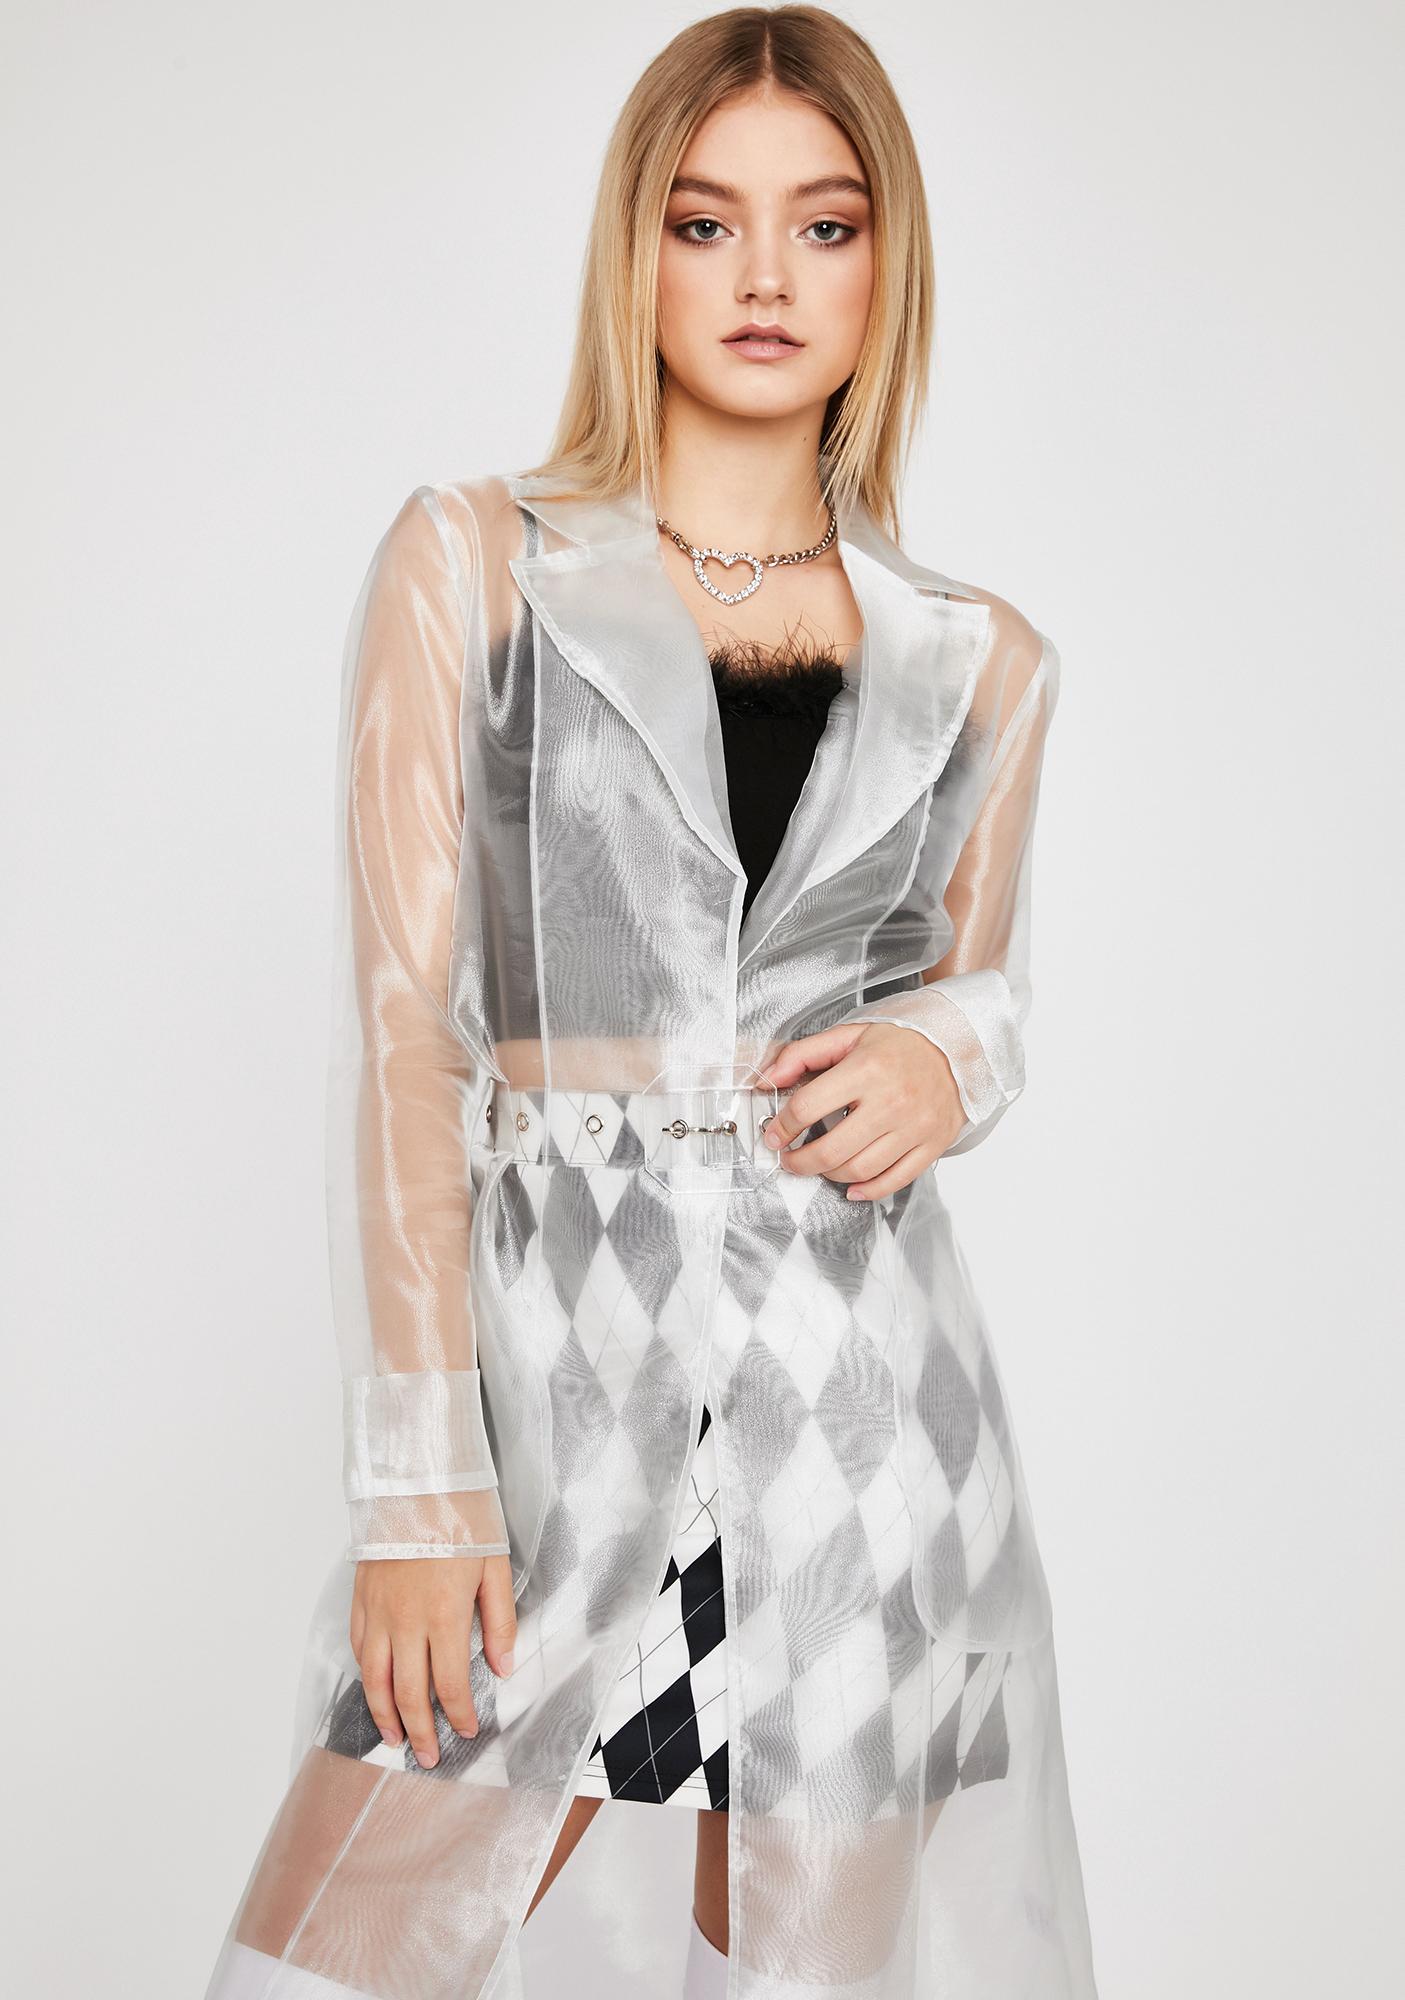 white sheer jacket to wear over dress